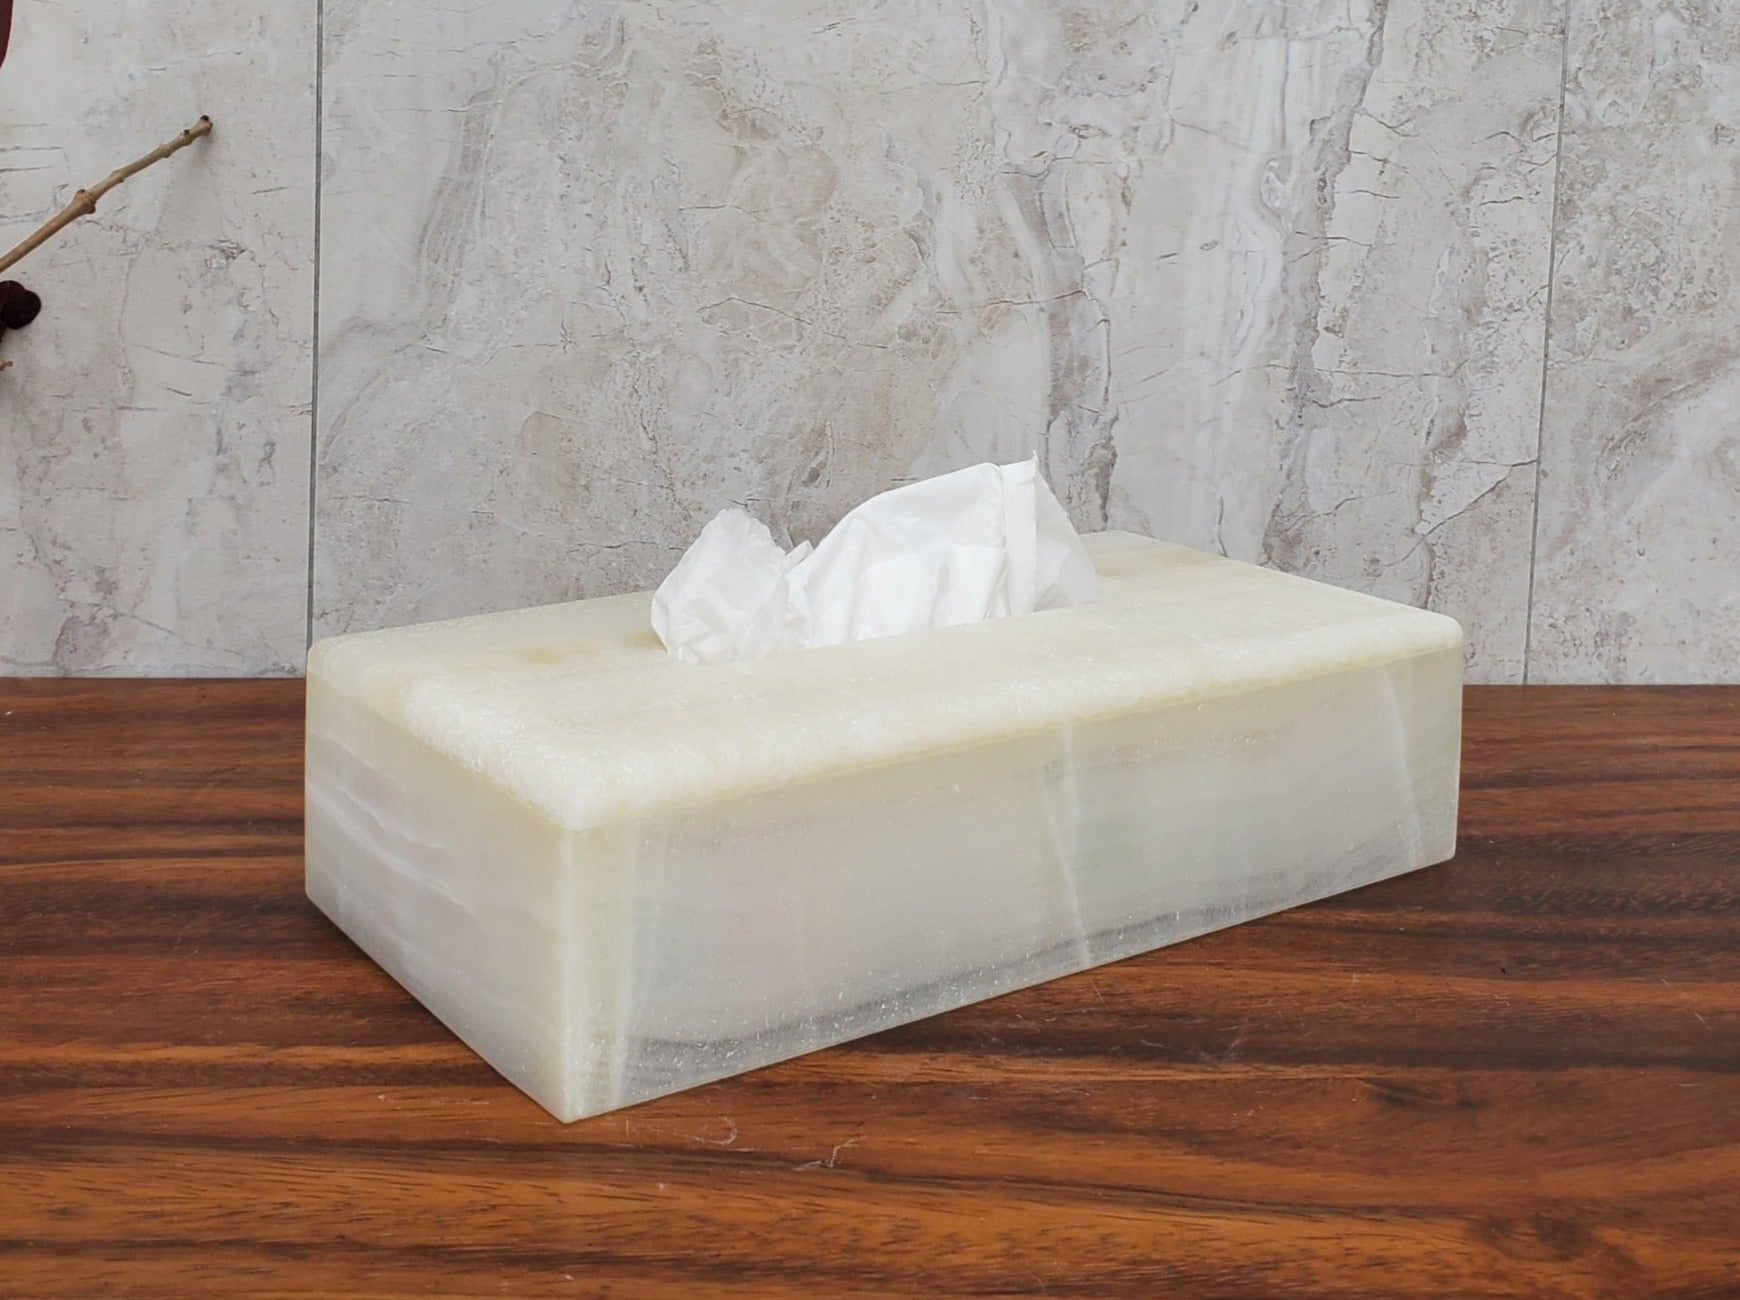 White Rectangle Onyx Tissue Box Cover. Handmade in Mexico. Ships from the USA. Buy now at www.felipeandgrace.com.